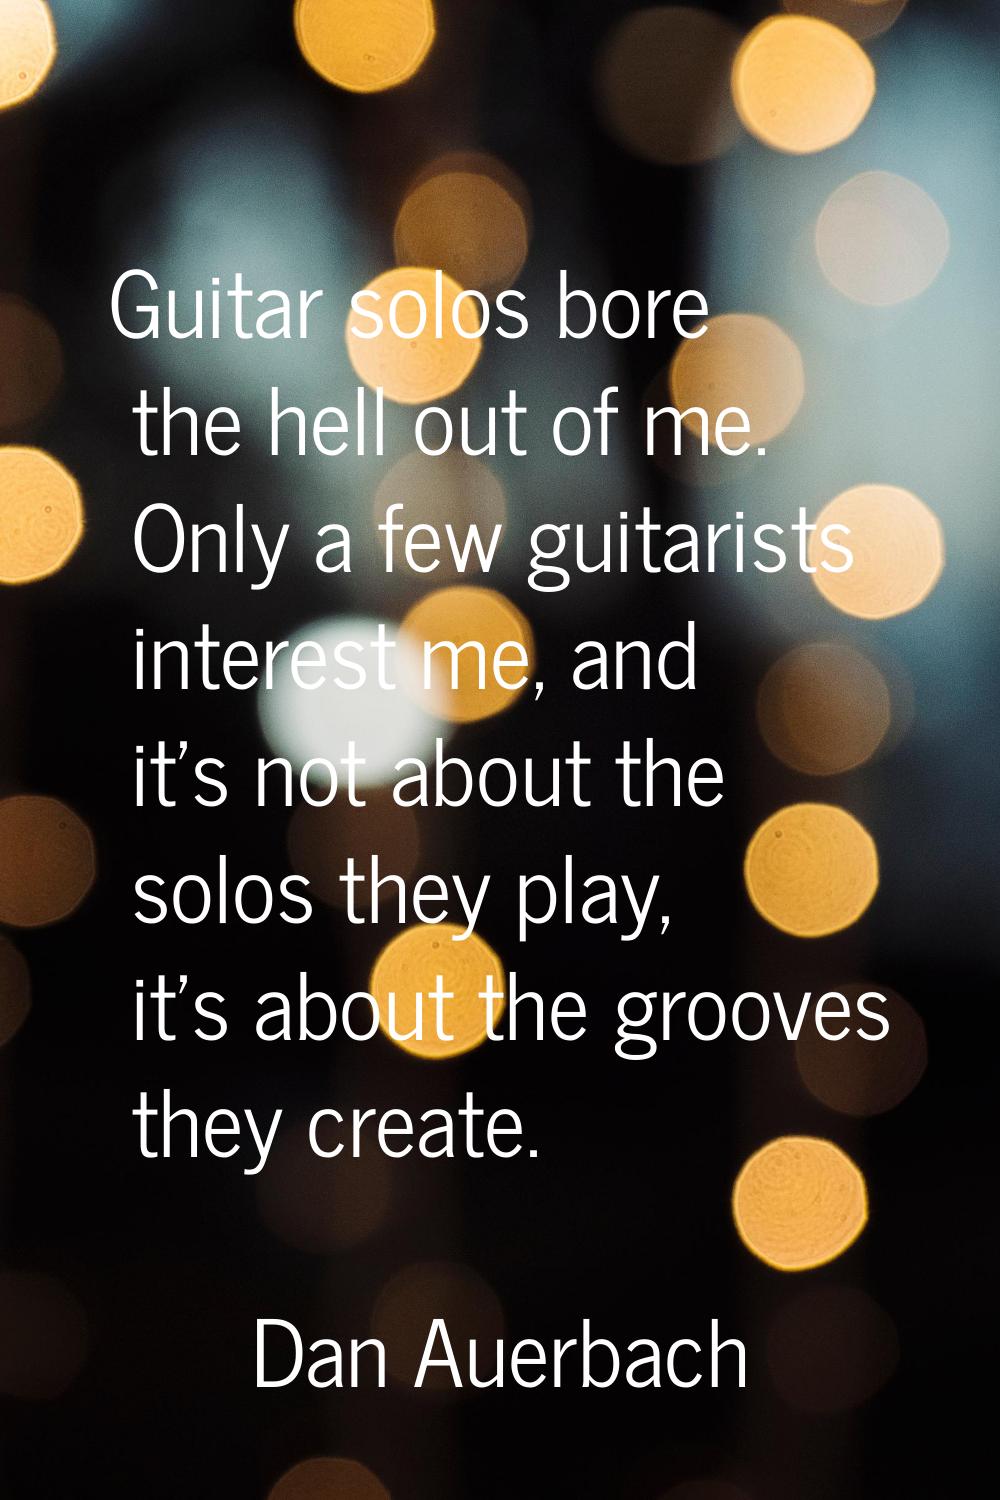 Guitar solos bore the hell out of me. Only a few guitarists interest me, and it's not about the sol